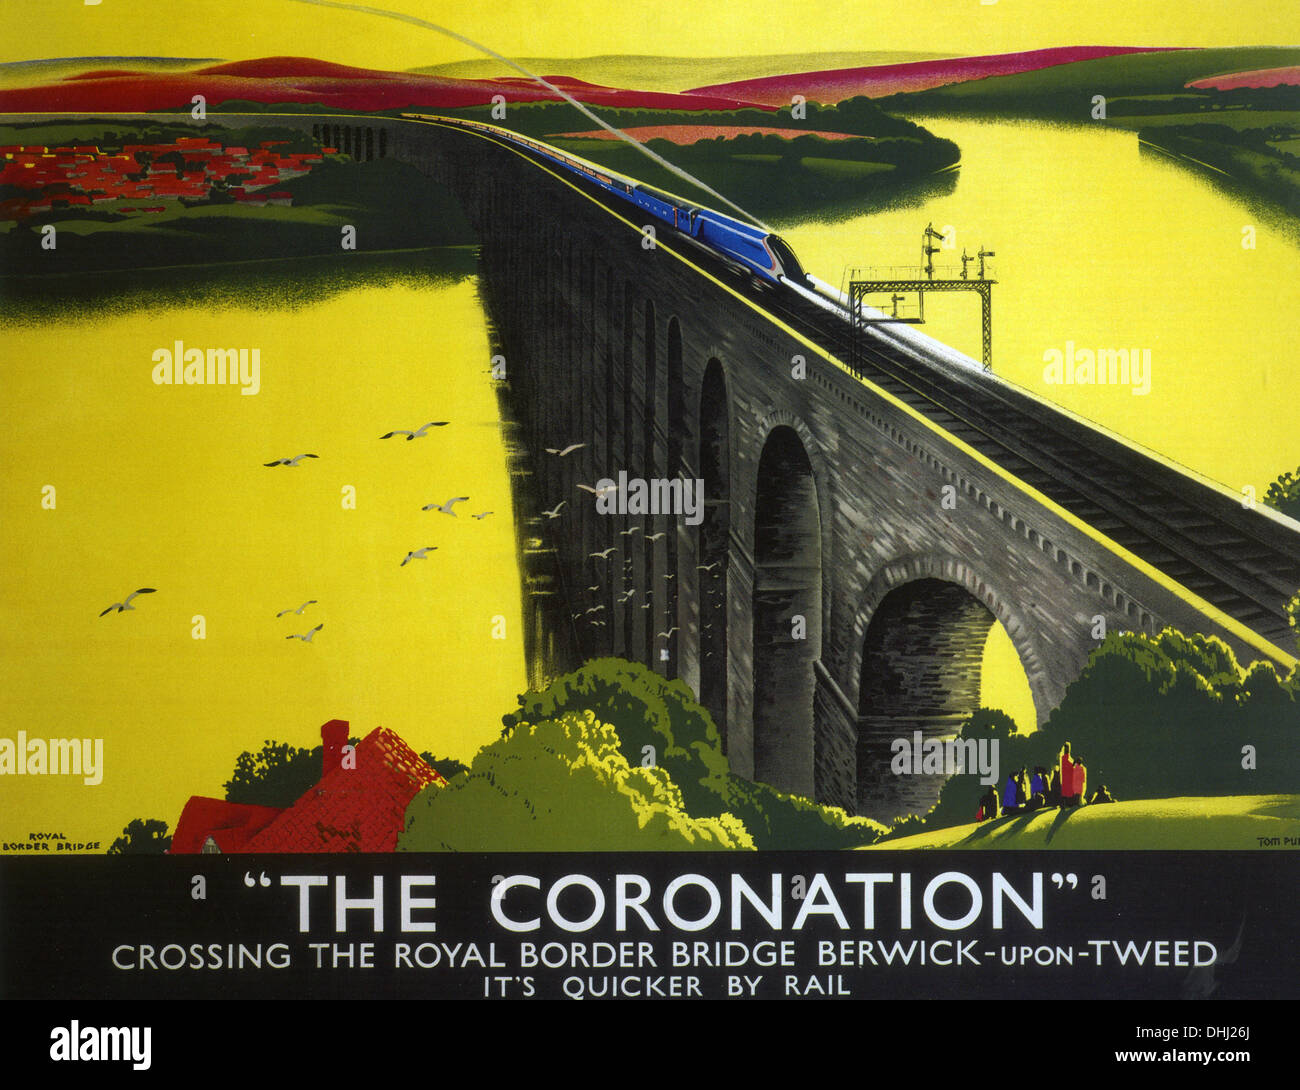 THE CORONATION train en route from Edinburgh to London in a poster about 1938 Stock Photo